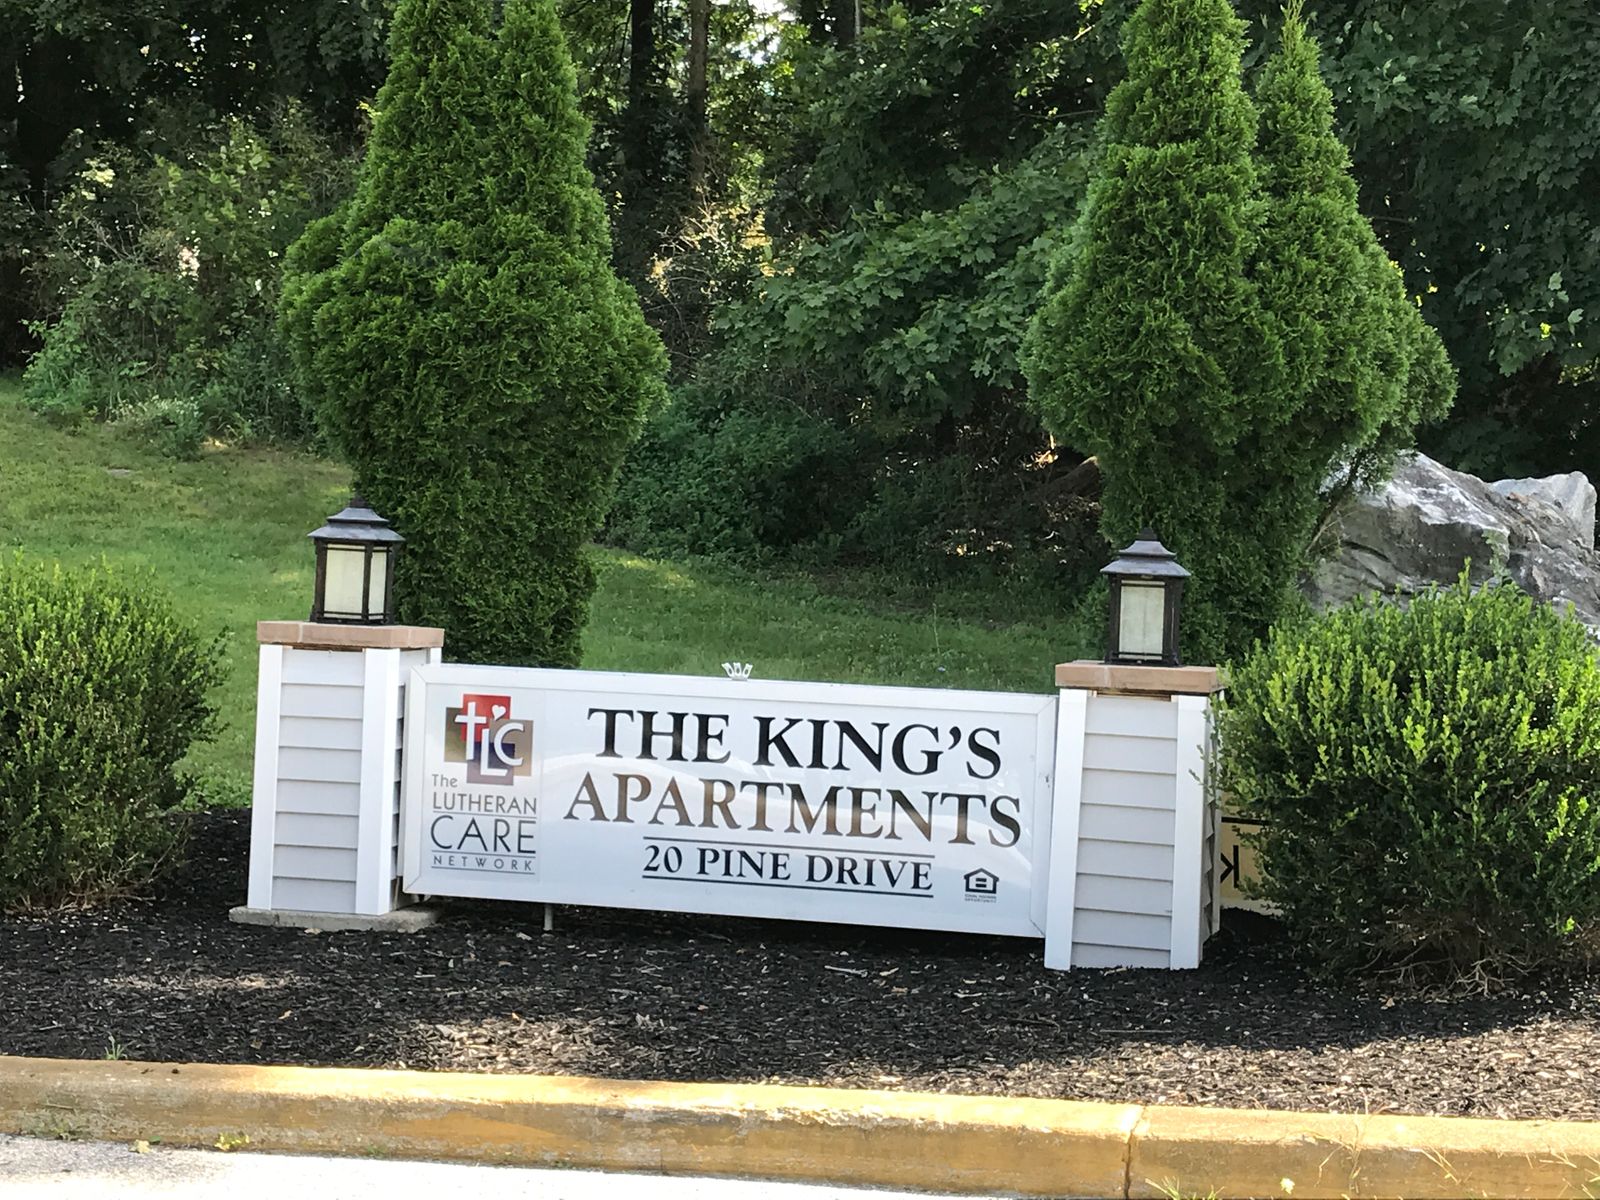 THE KINGS APARTMENTS